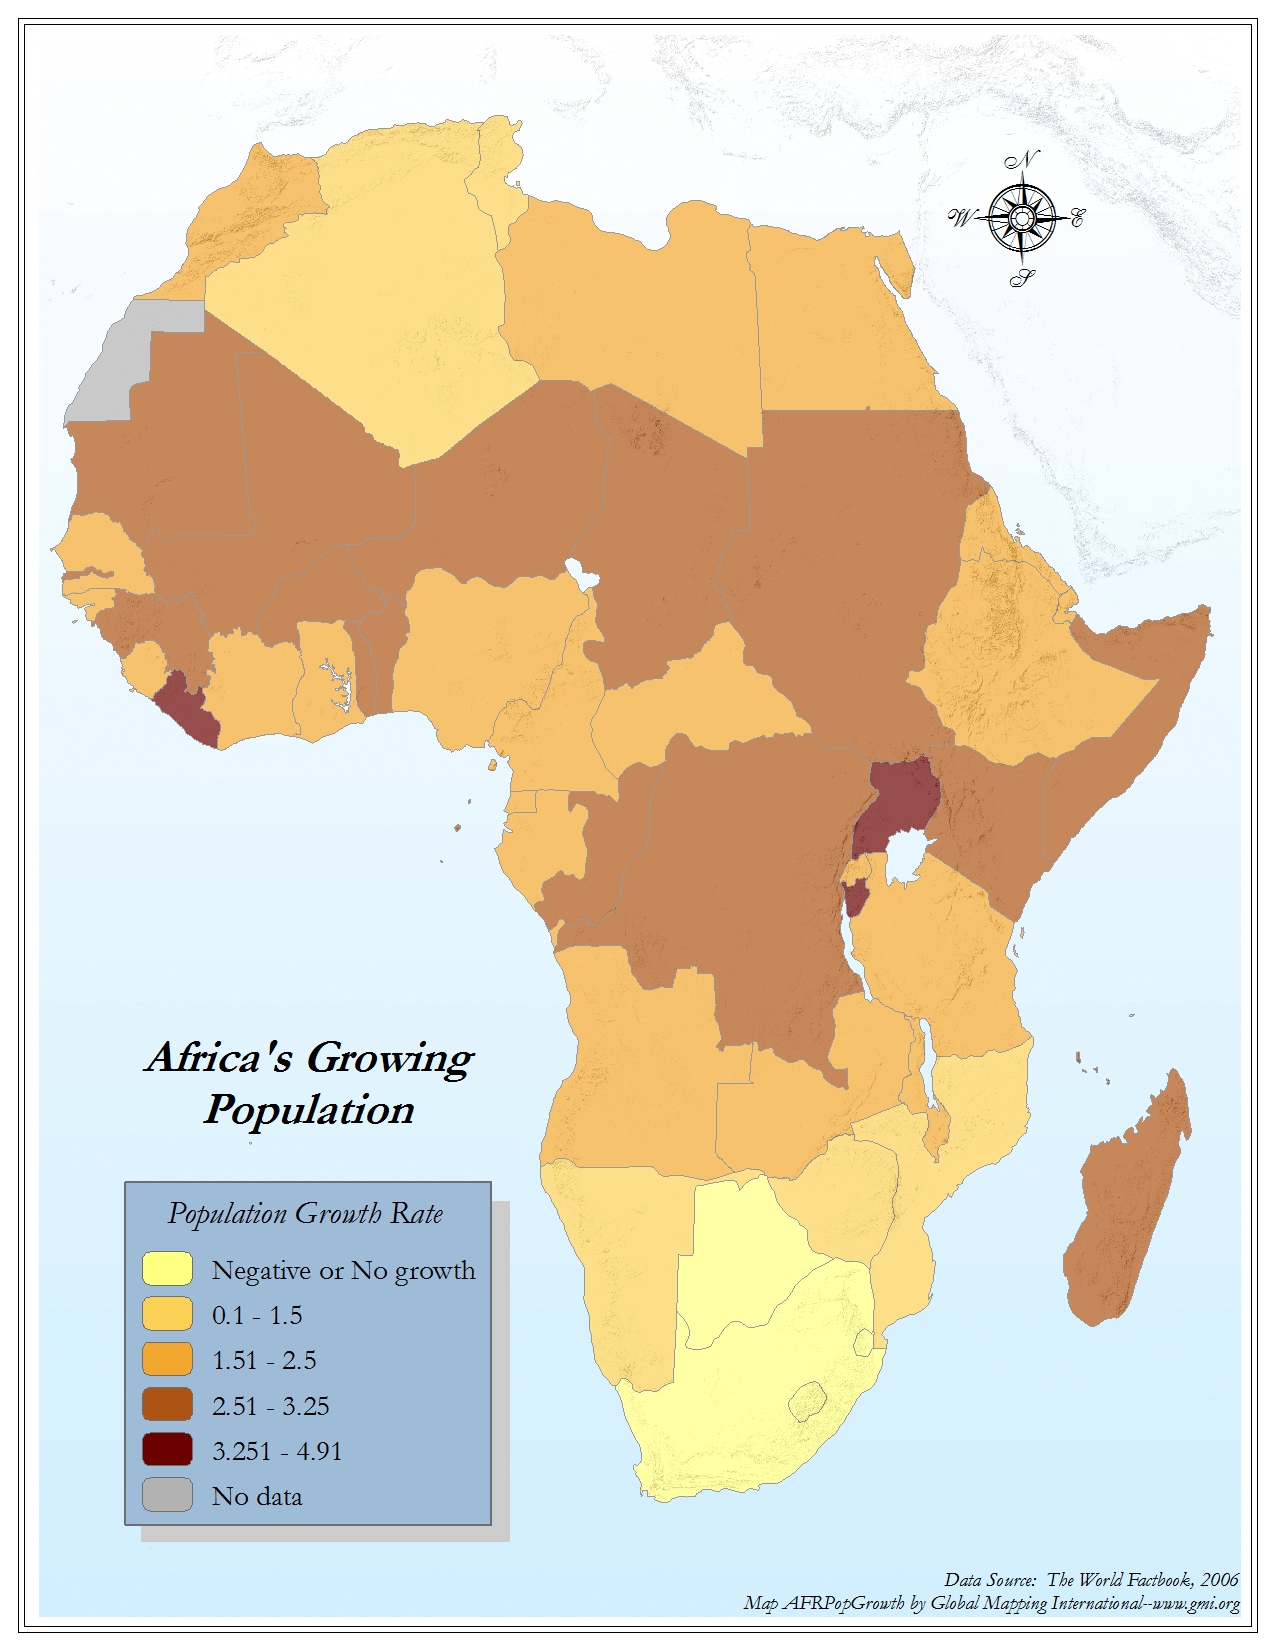 Africa's Growing Population